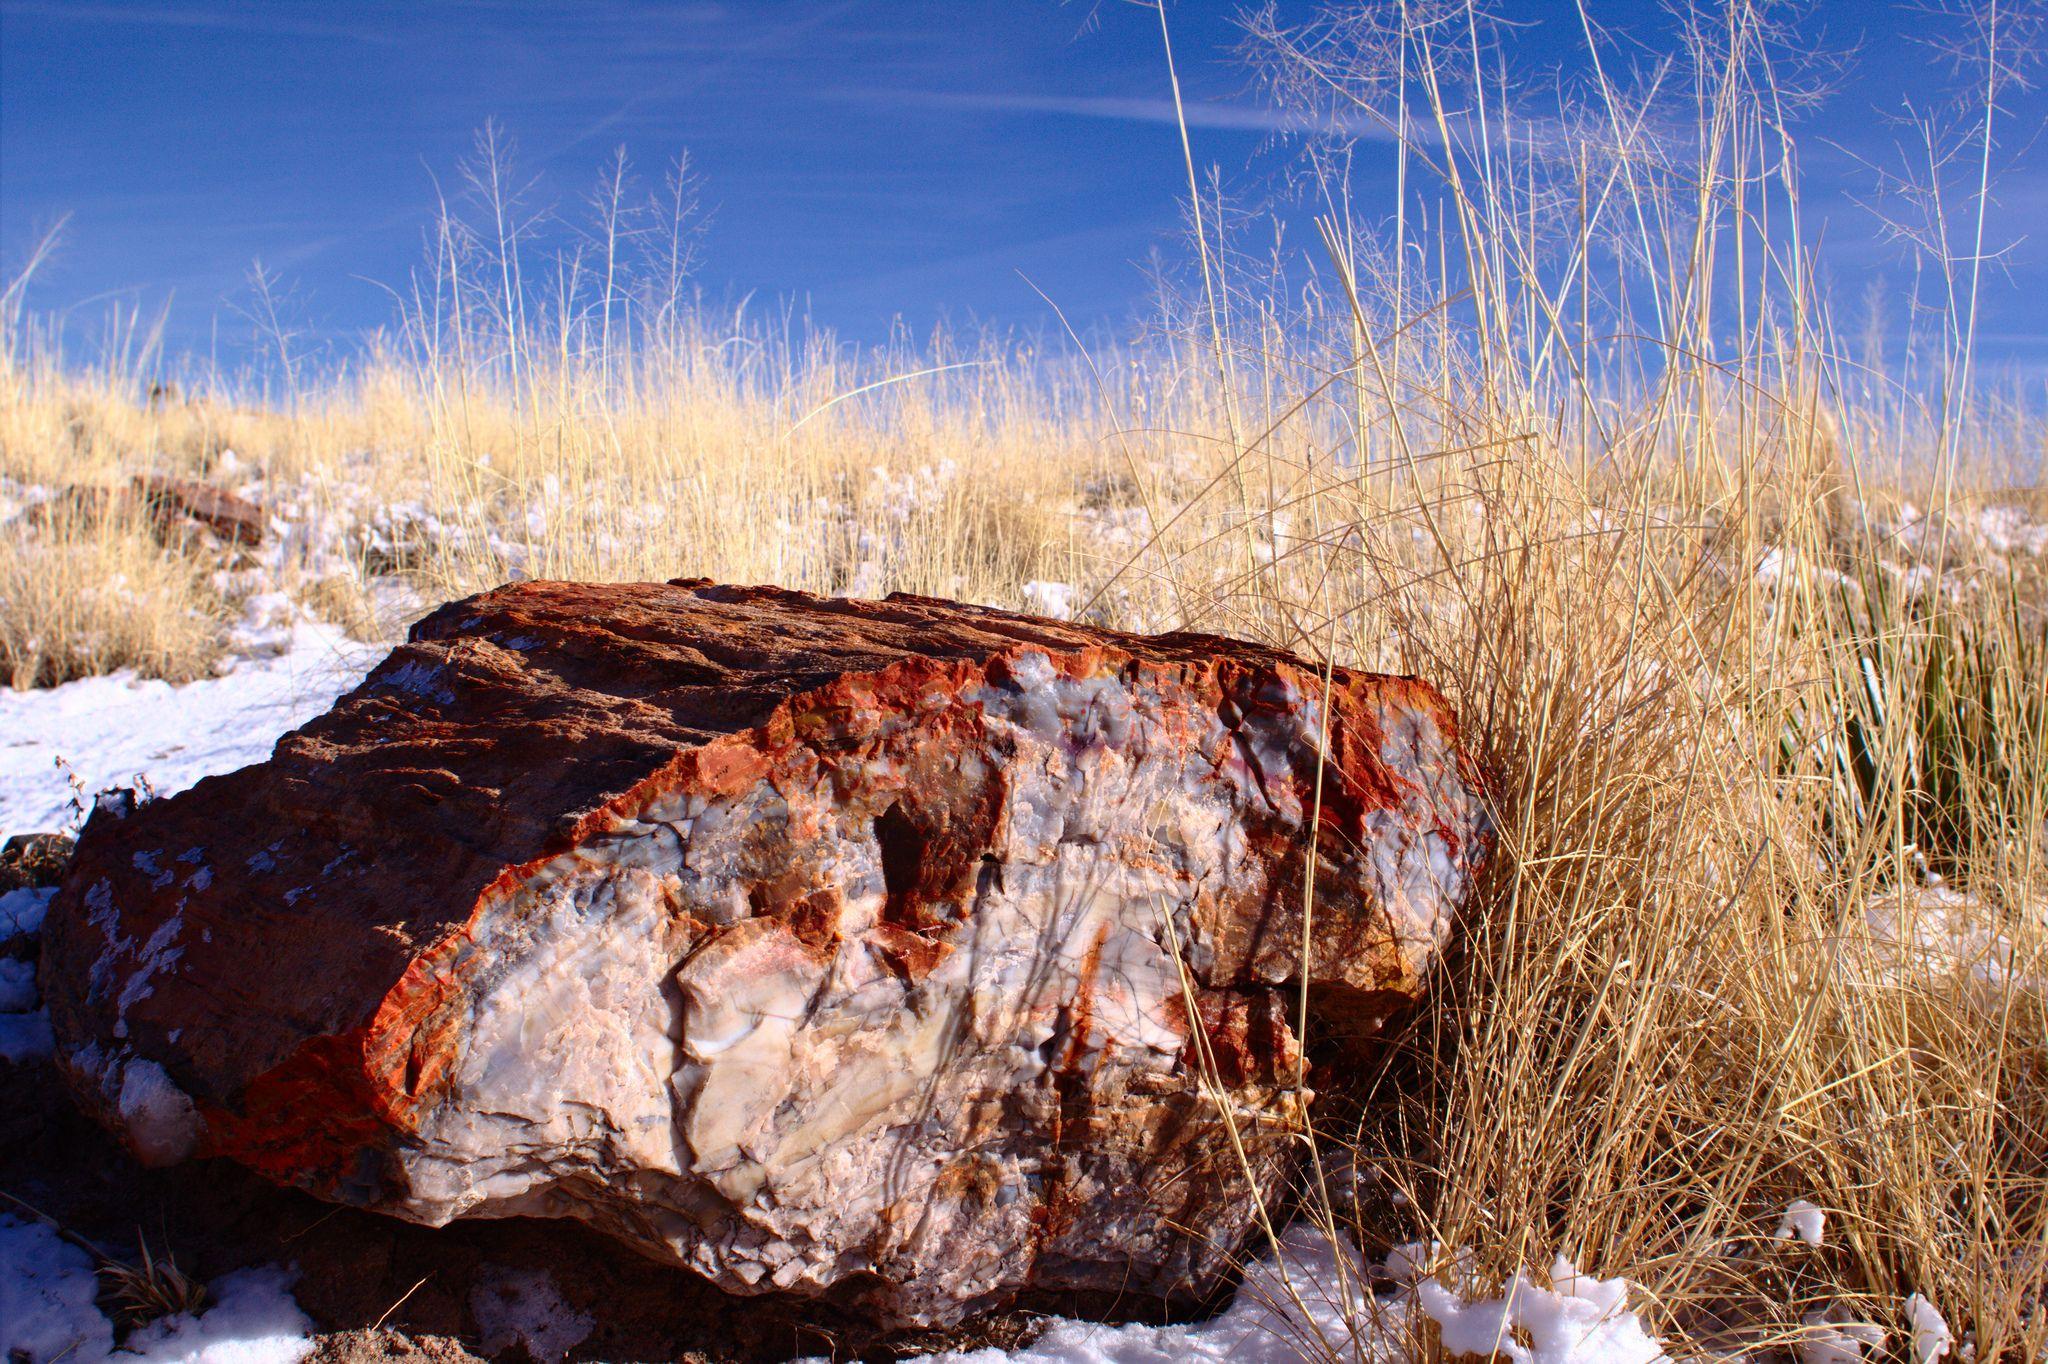 One Of The Fossilized Wood At The Petrified Forest National Park